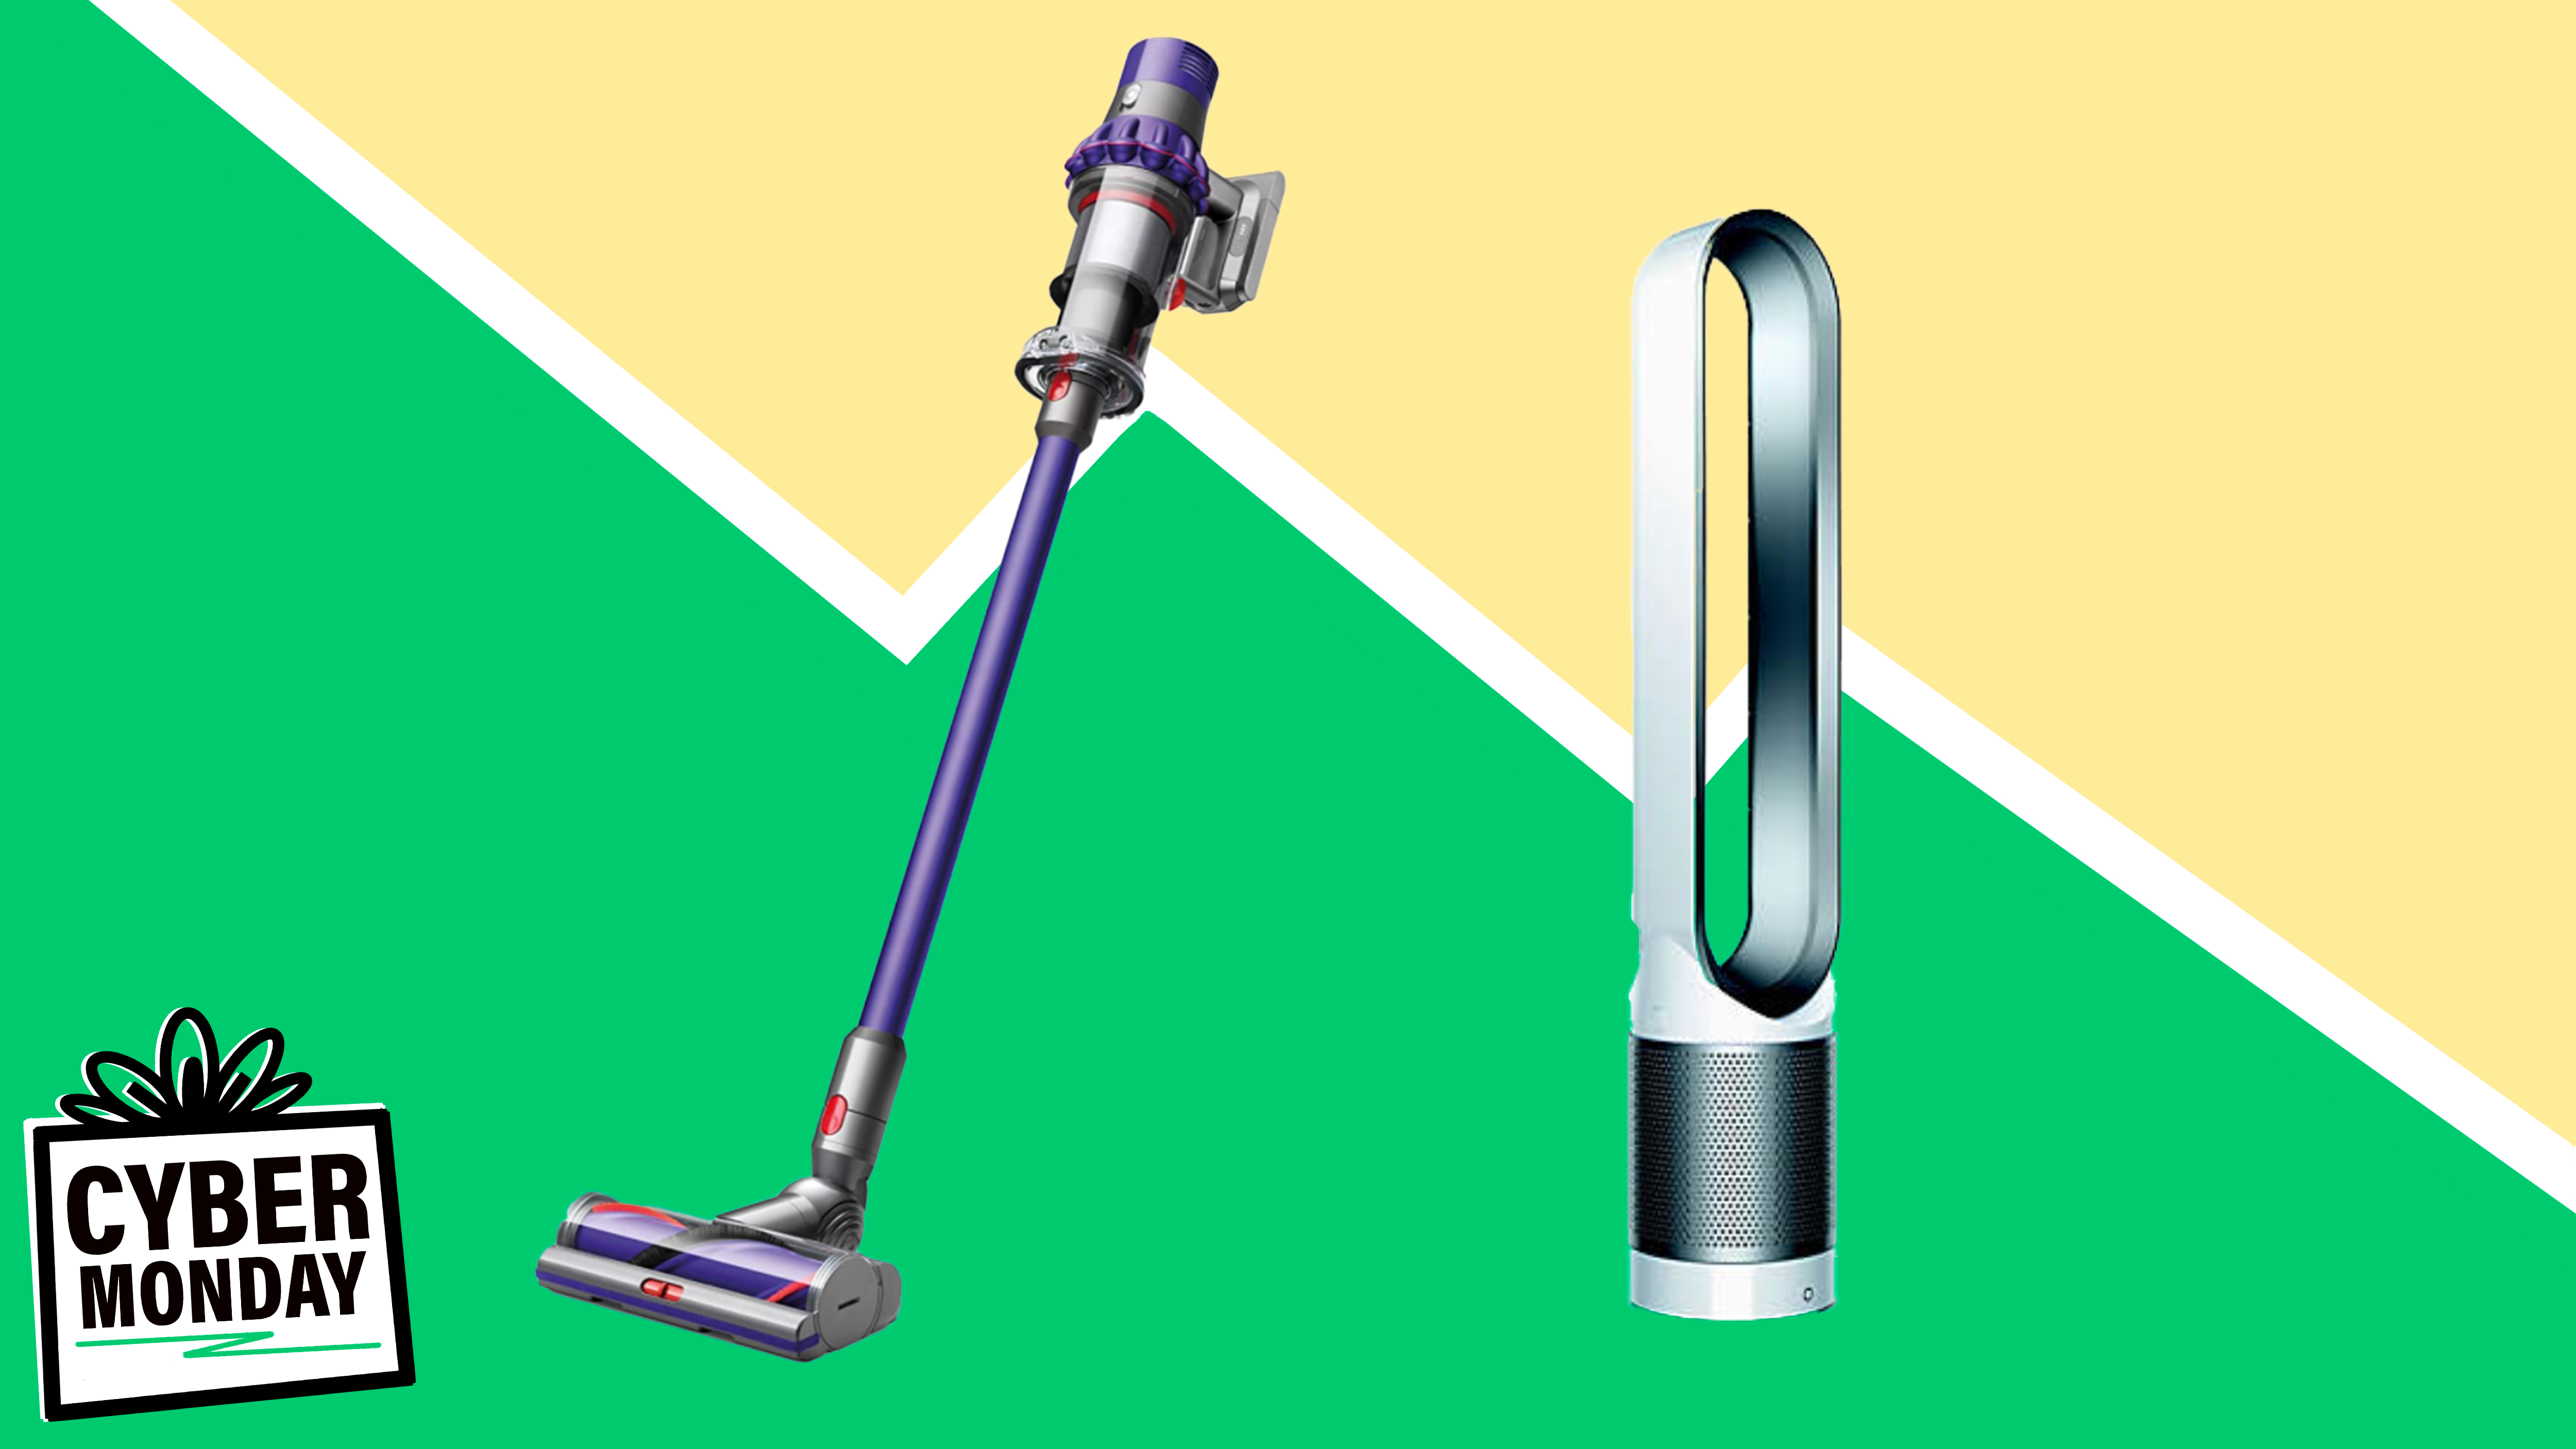 Monday 2021: Dyson Cyber Monday early sales on vacuums and fans